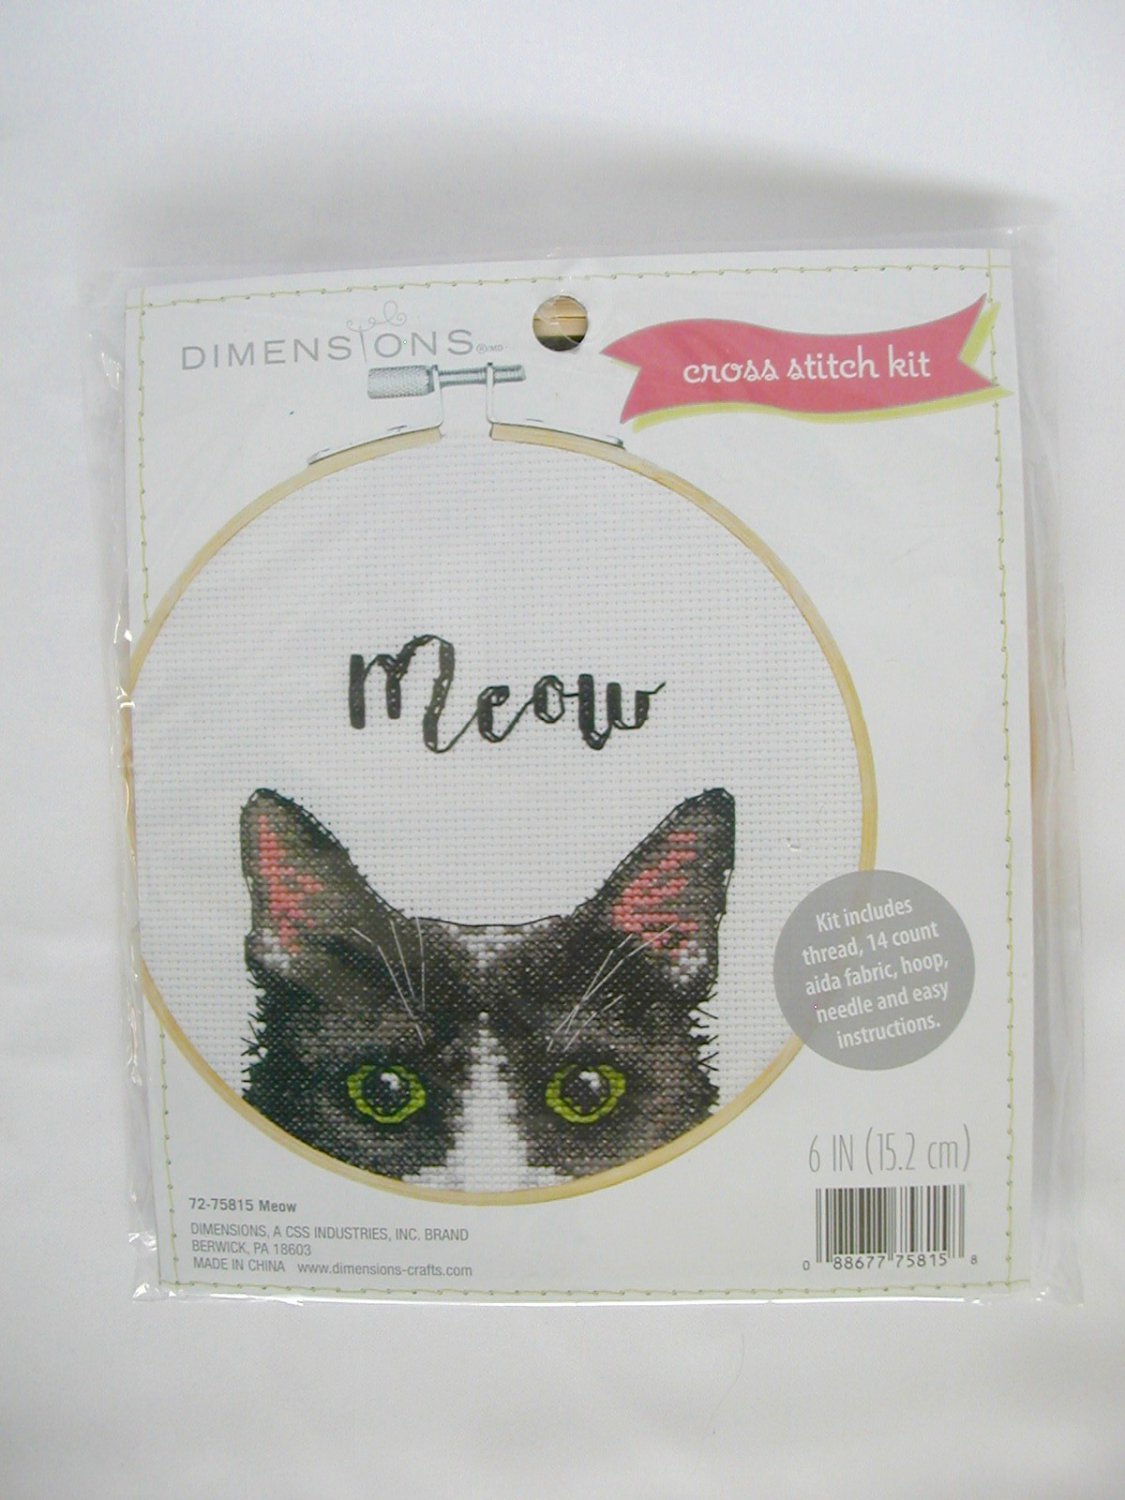 Dimensions Meow grey white cat counted cross stitch kit 72-75815